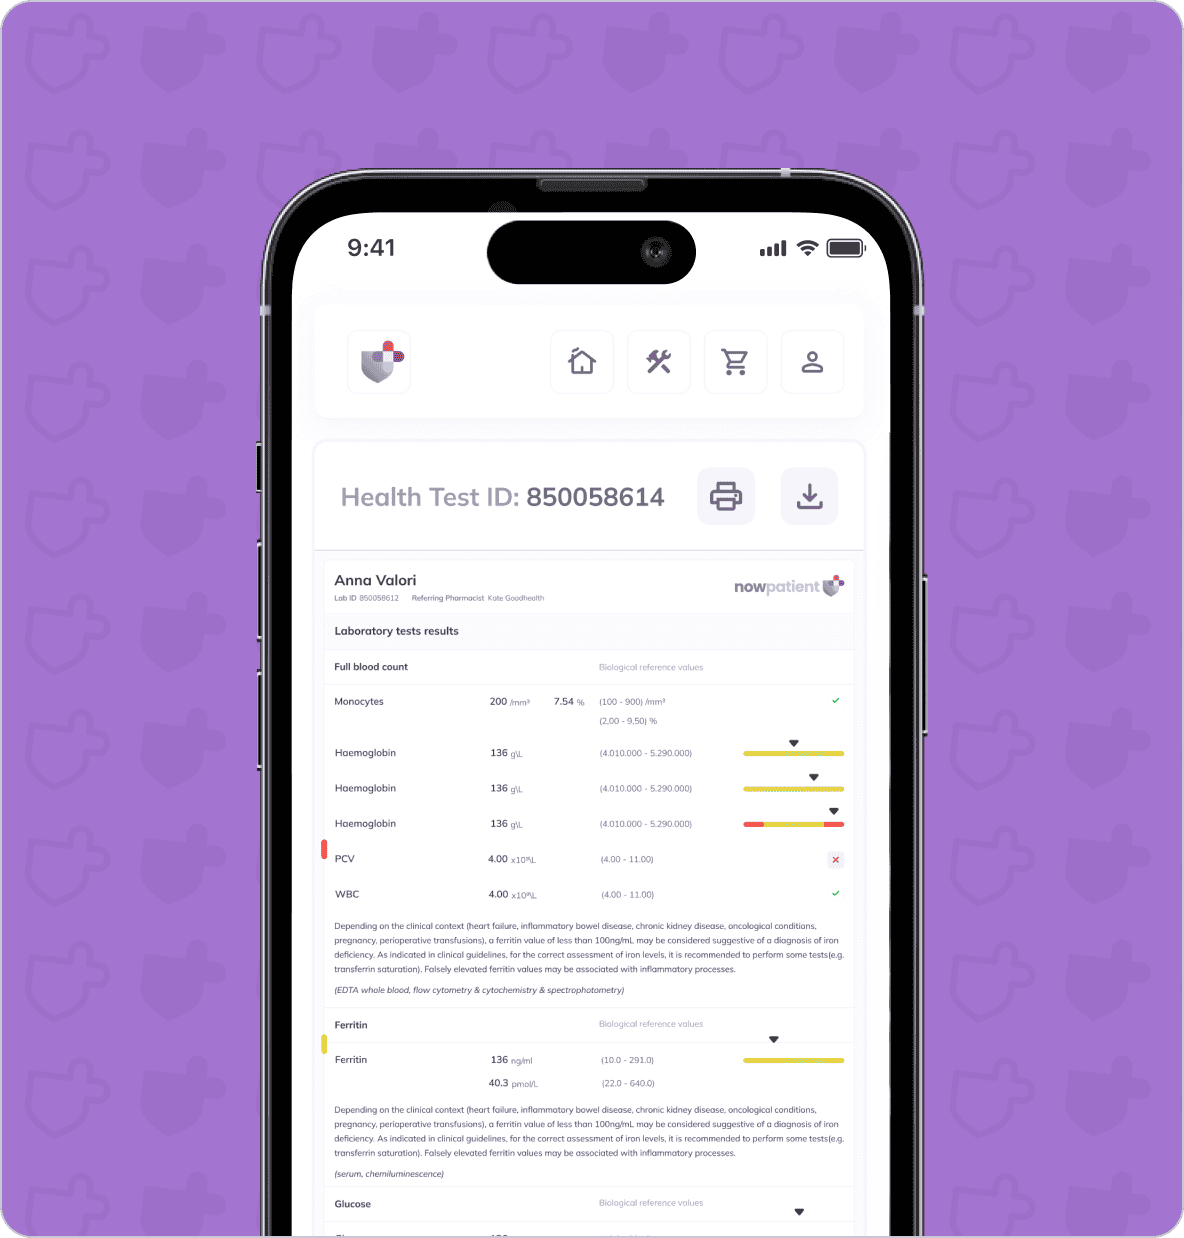 A smartphone displays a health test report with the ID 850058614 against a purple background. The report includes details such as patient name, laboratory test results, and biological reference intervals.